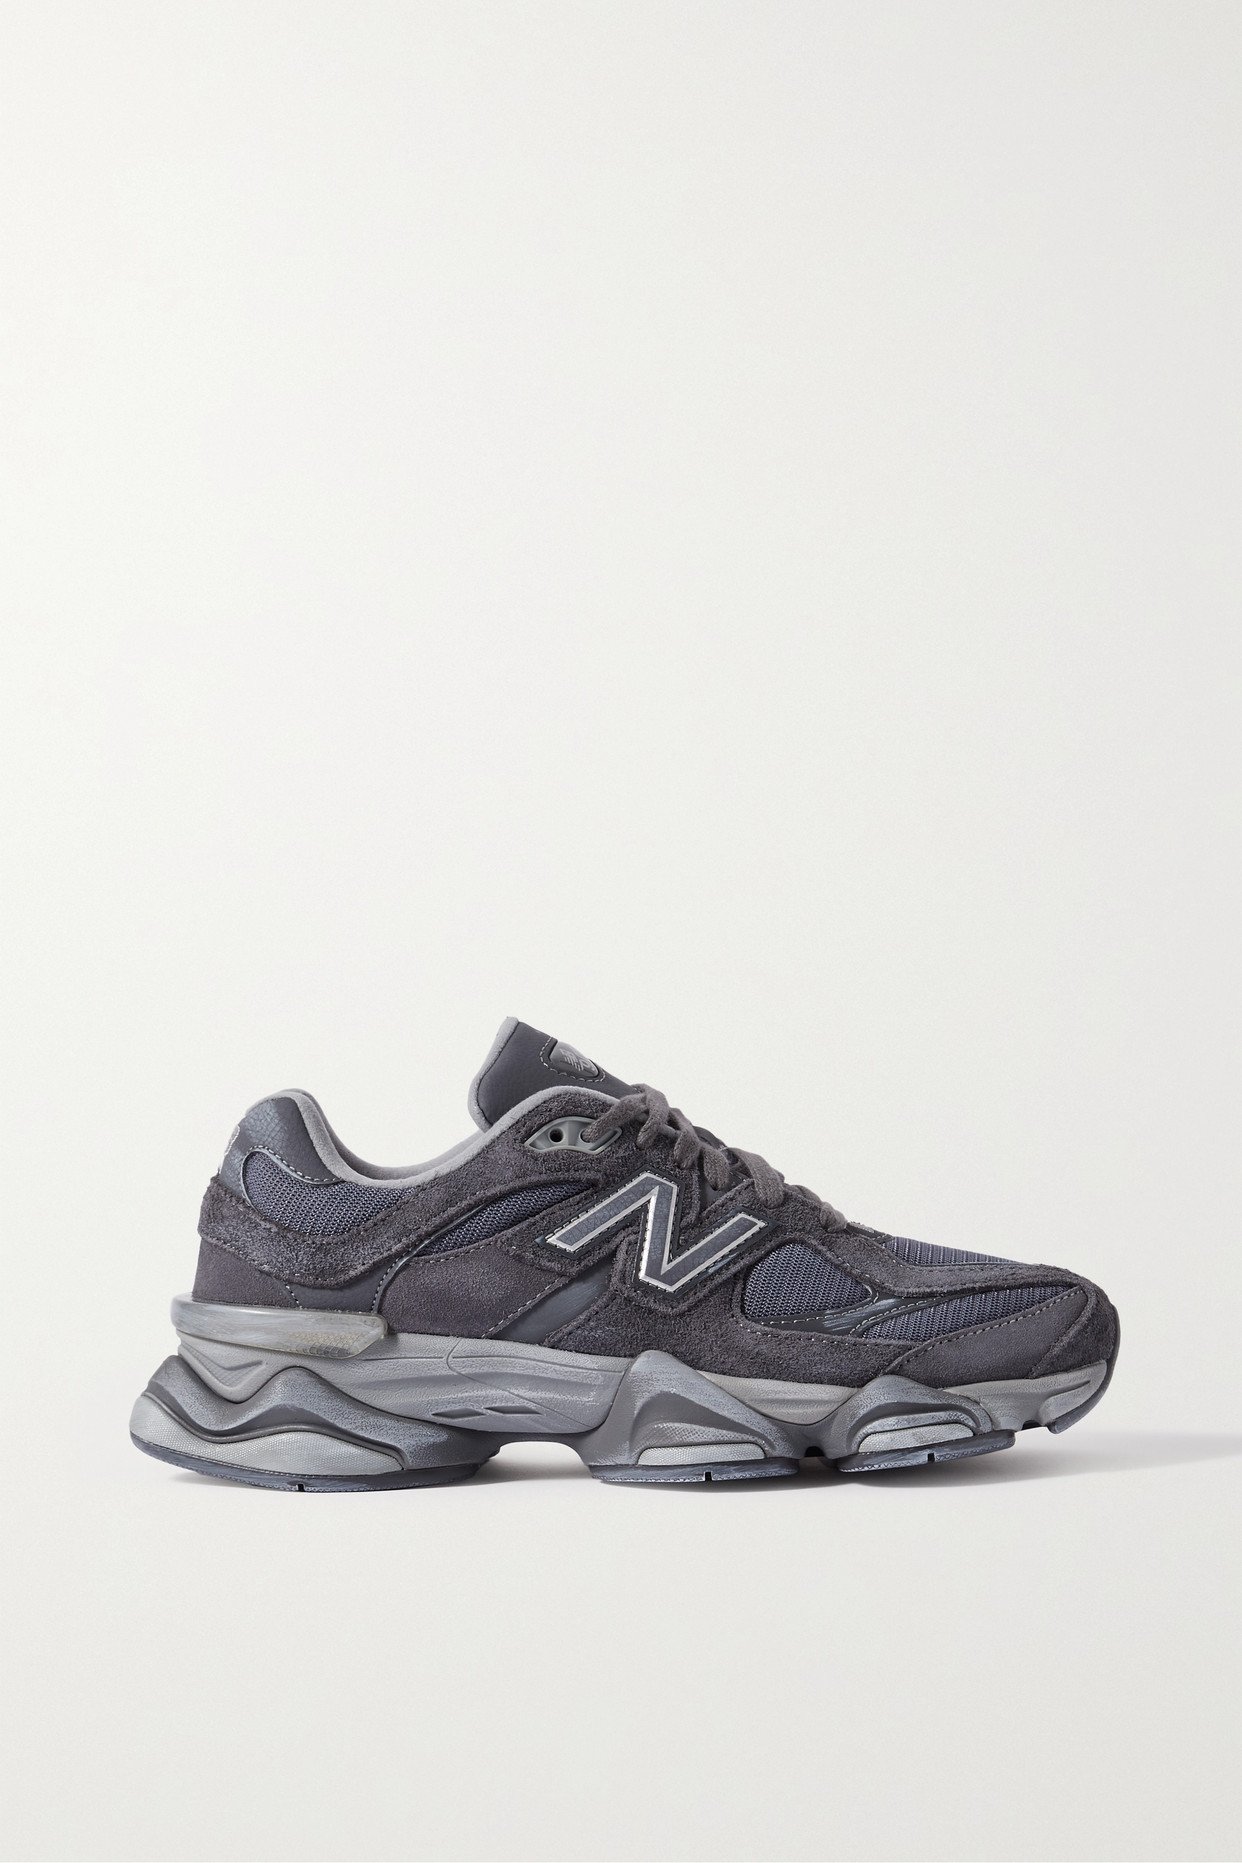 NEW BALANCE 9060 nubuck-trimmed leather and mesh sneakers